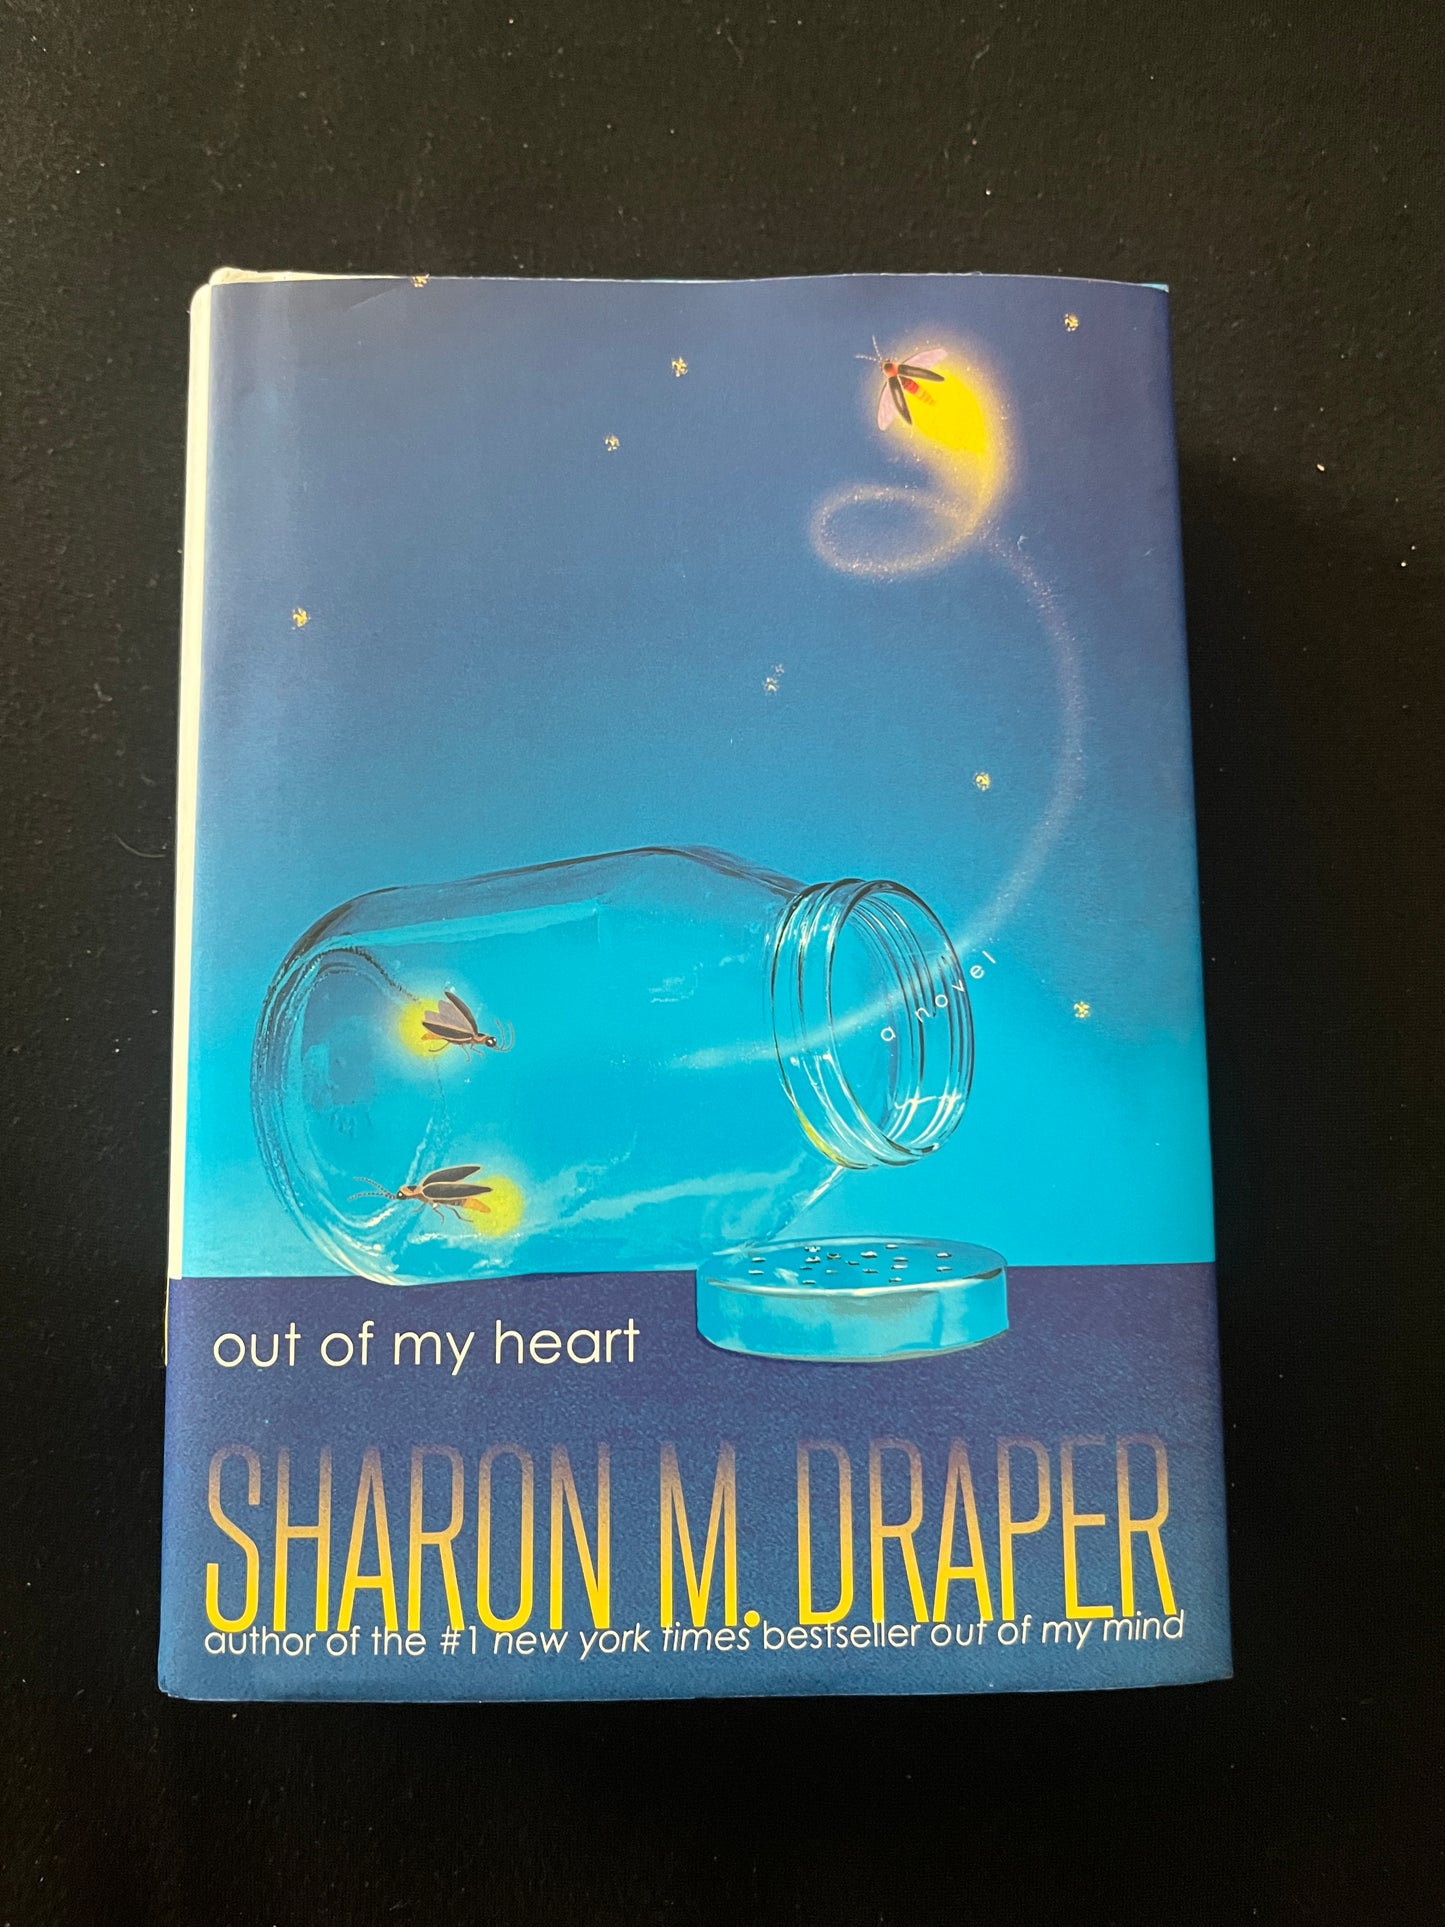 OUT OF MY HEART by Sharon M. Draper